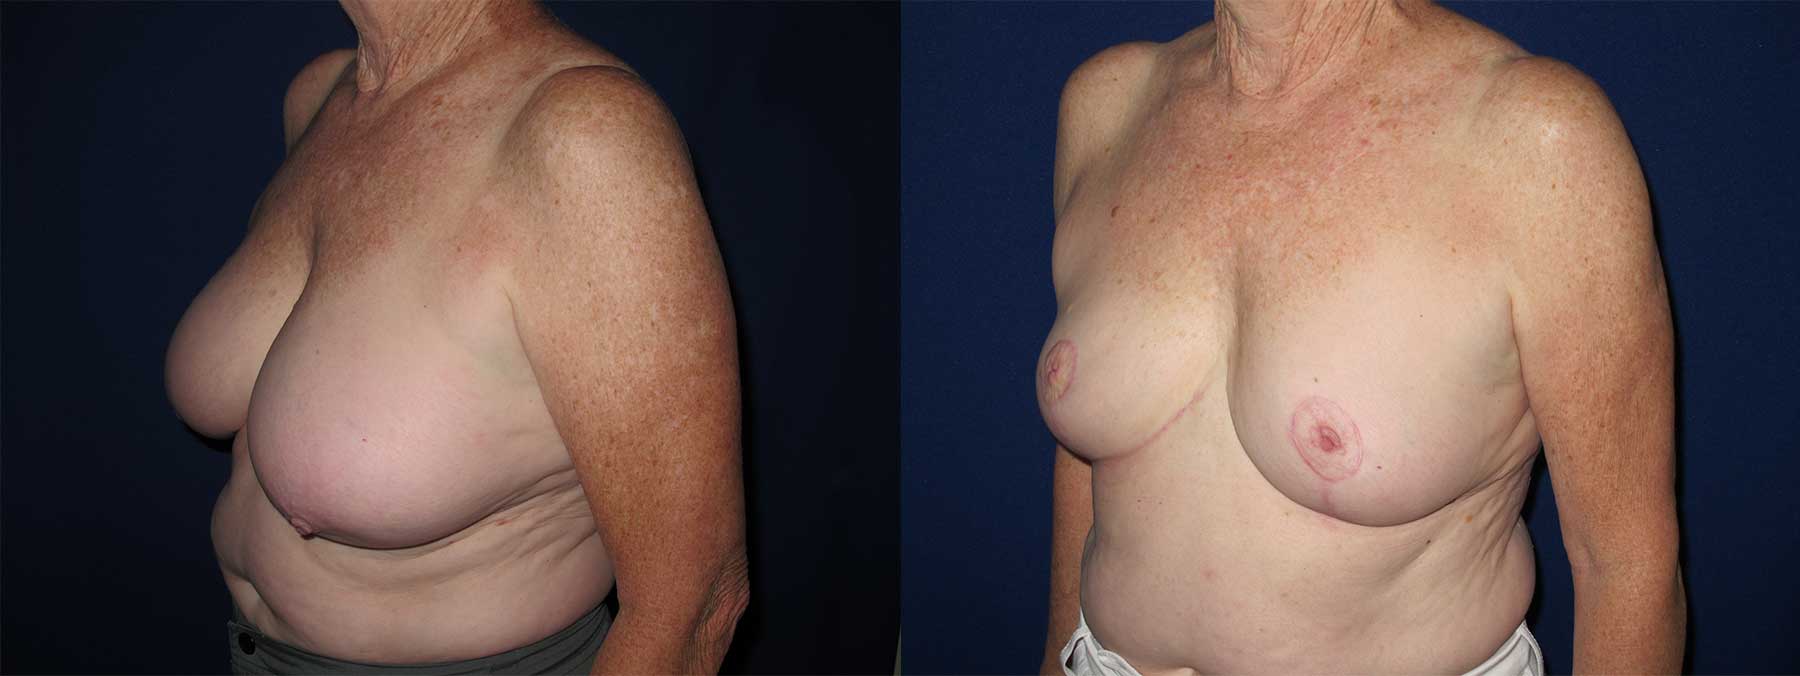 Before and After Image of Breast Reduction